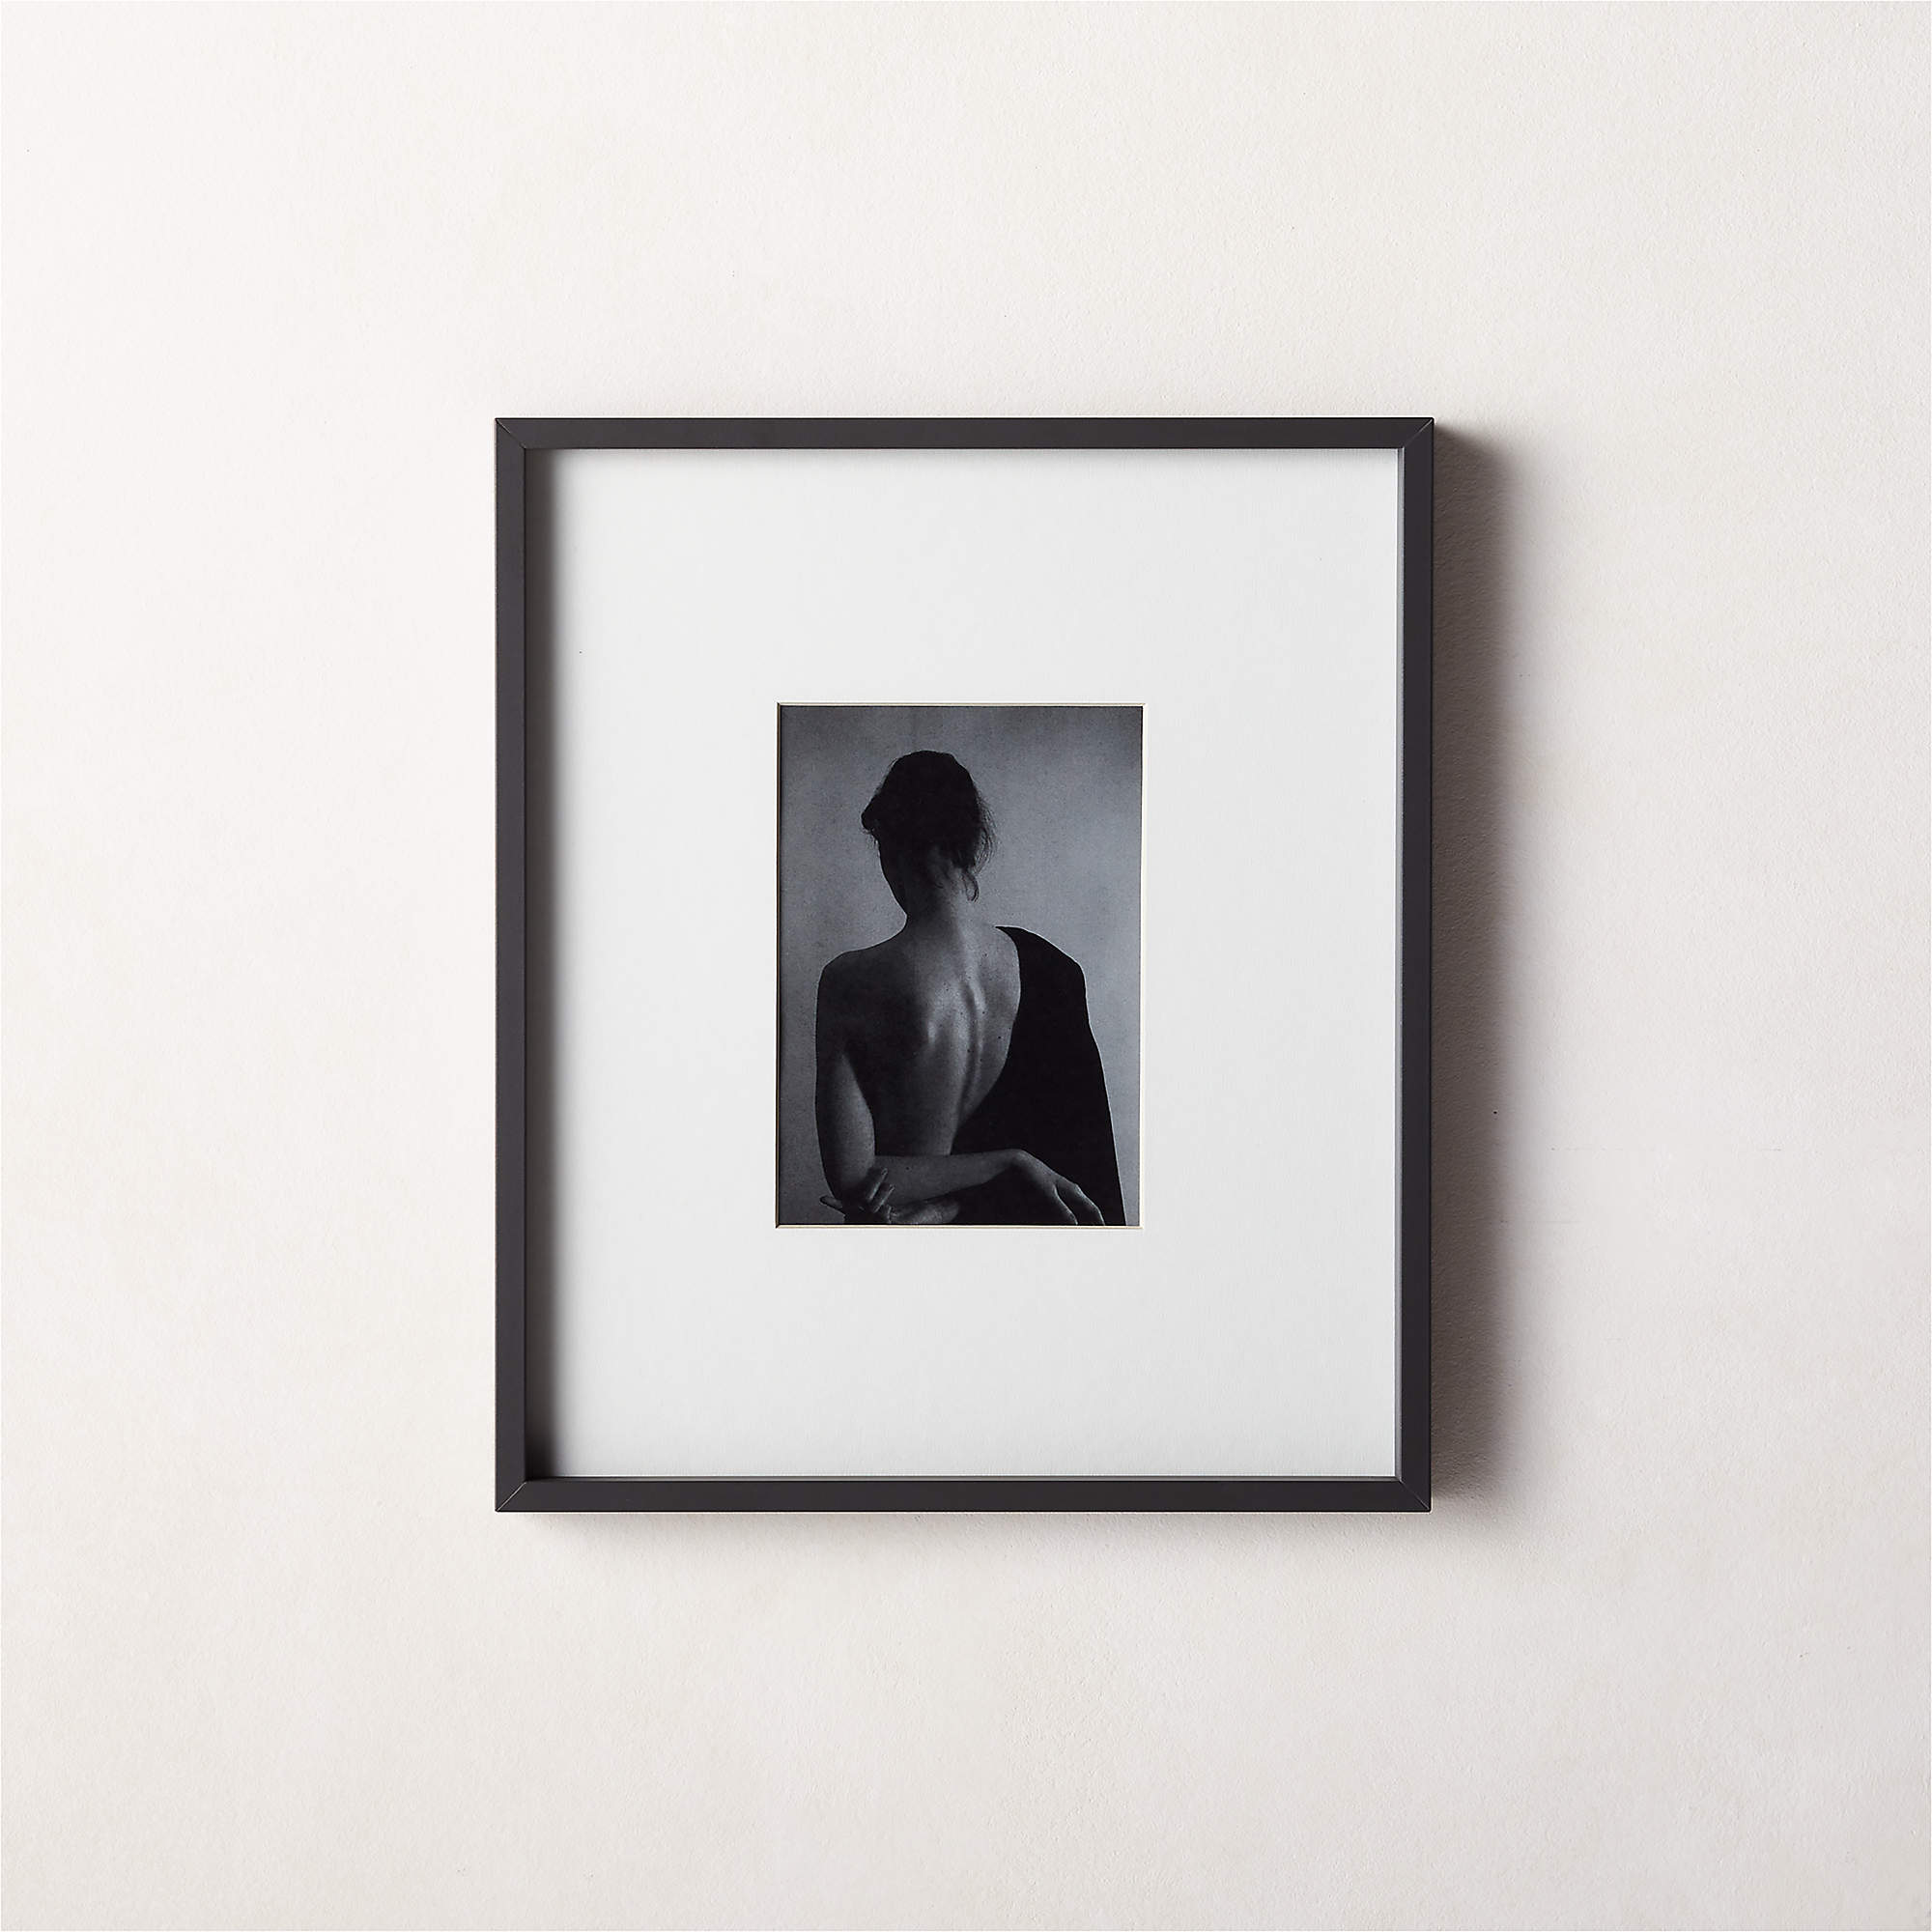 Gallery Soft Black Picture Frame with White Mat 5